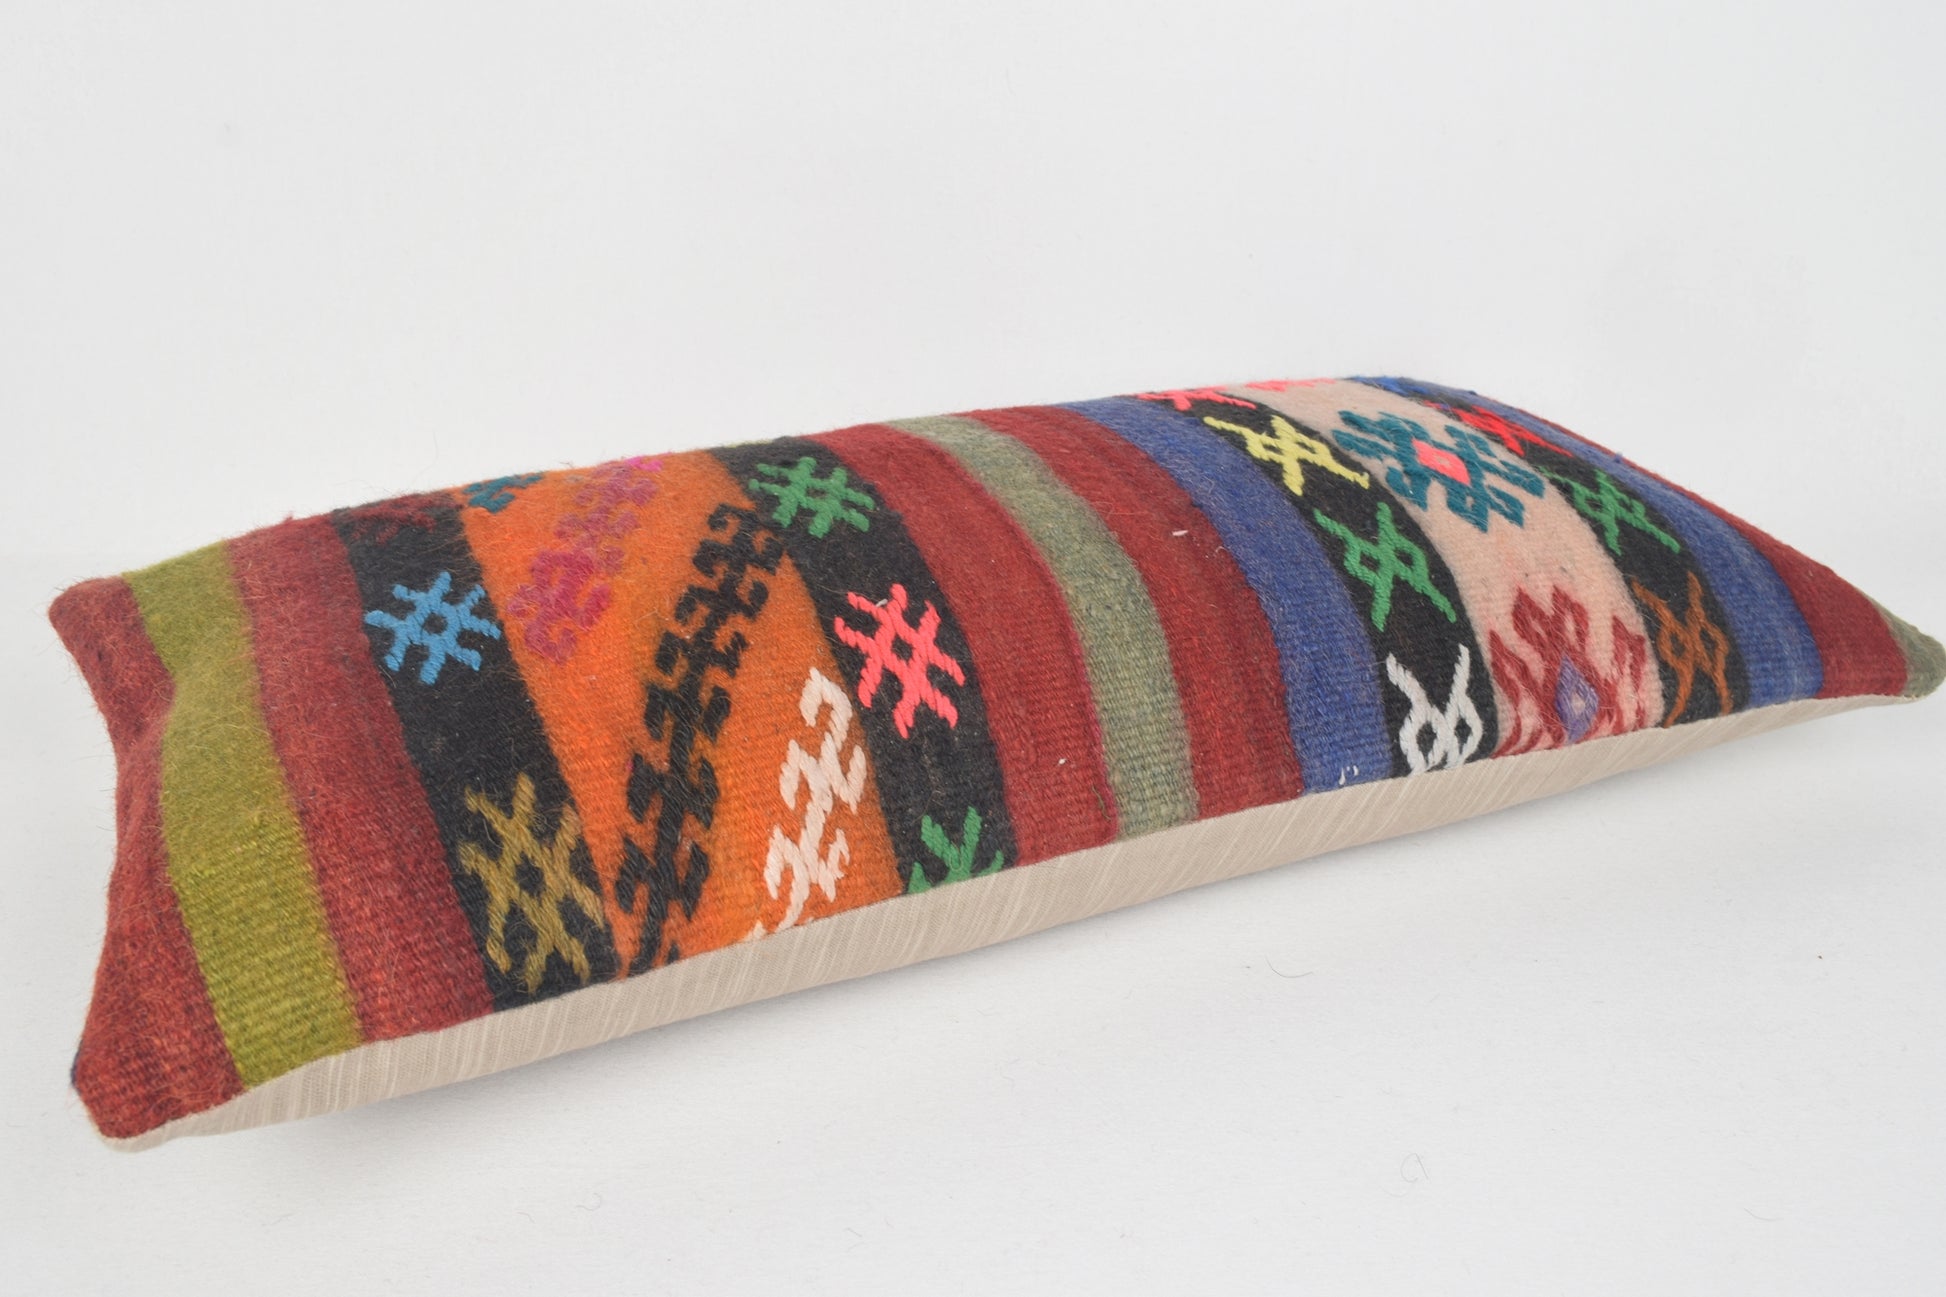 Turkish Rugs Mississauga Pillow, Kilim Rugs Auckland Pillow F00165 12x24 " - 30x60 cm.